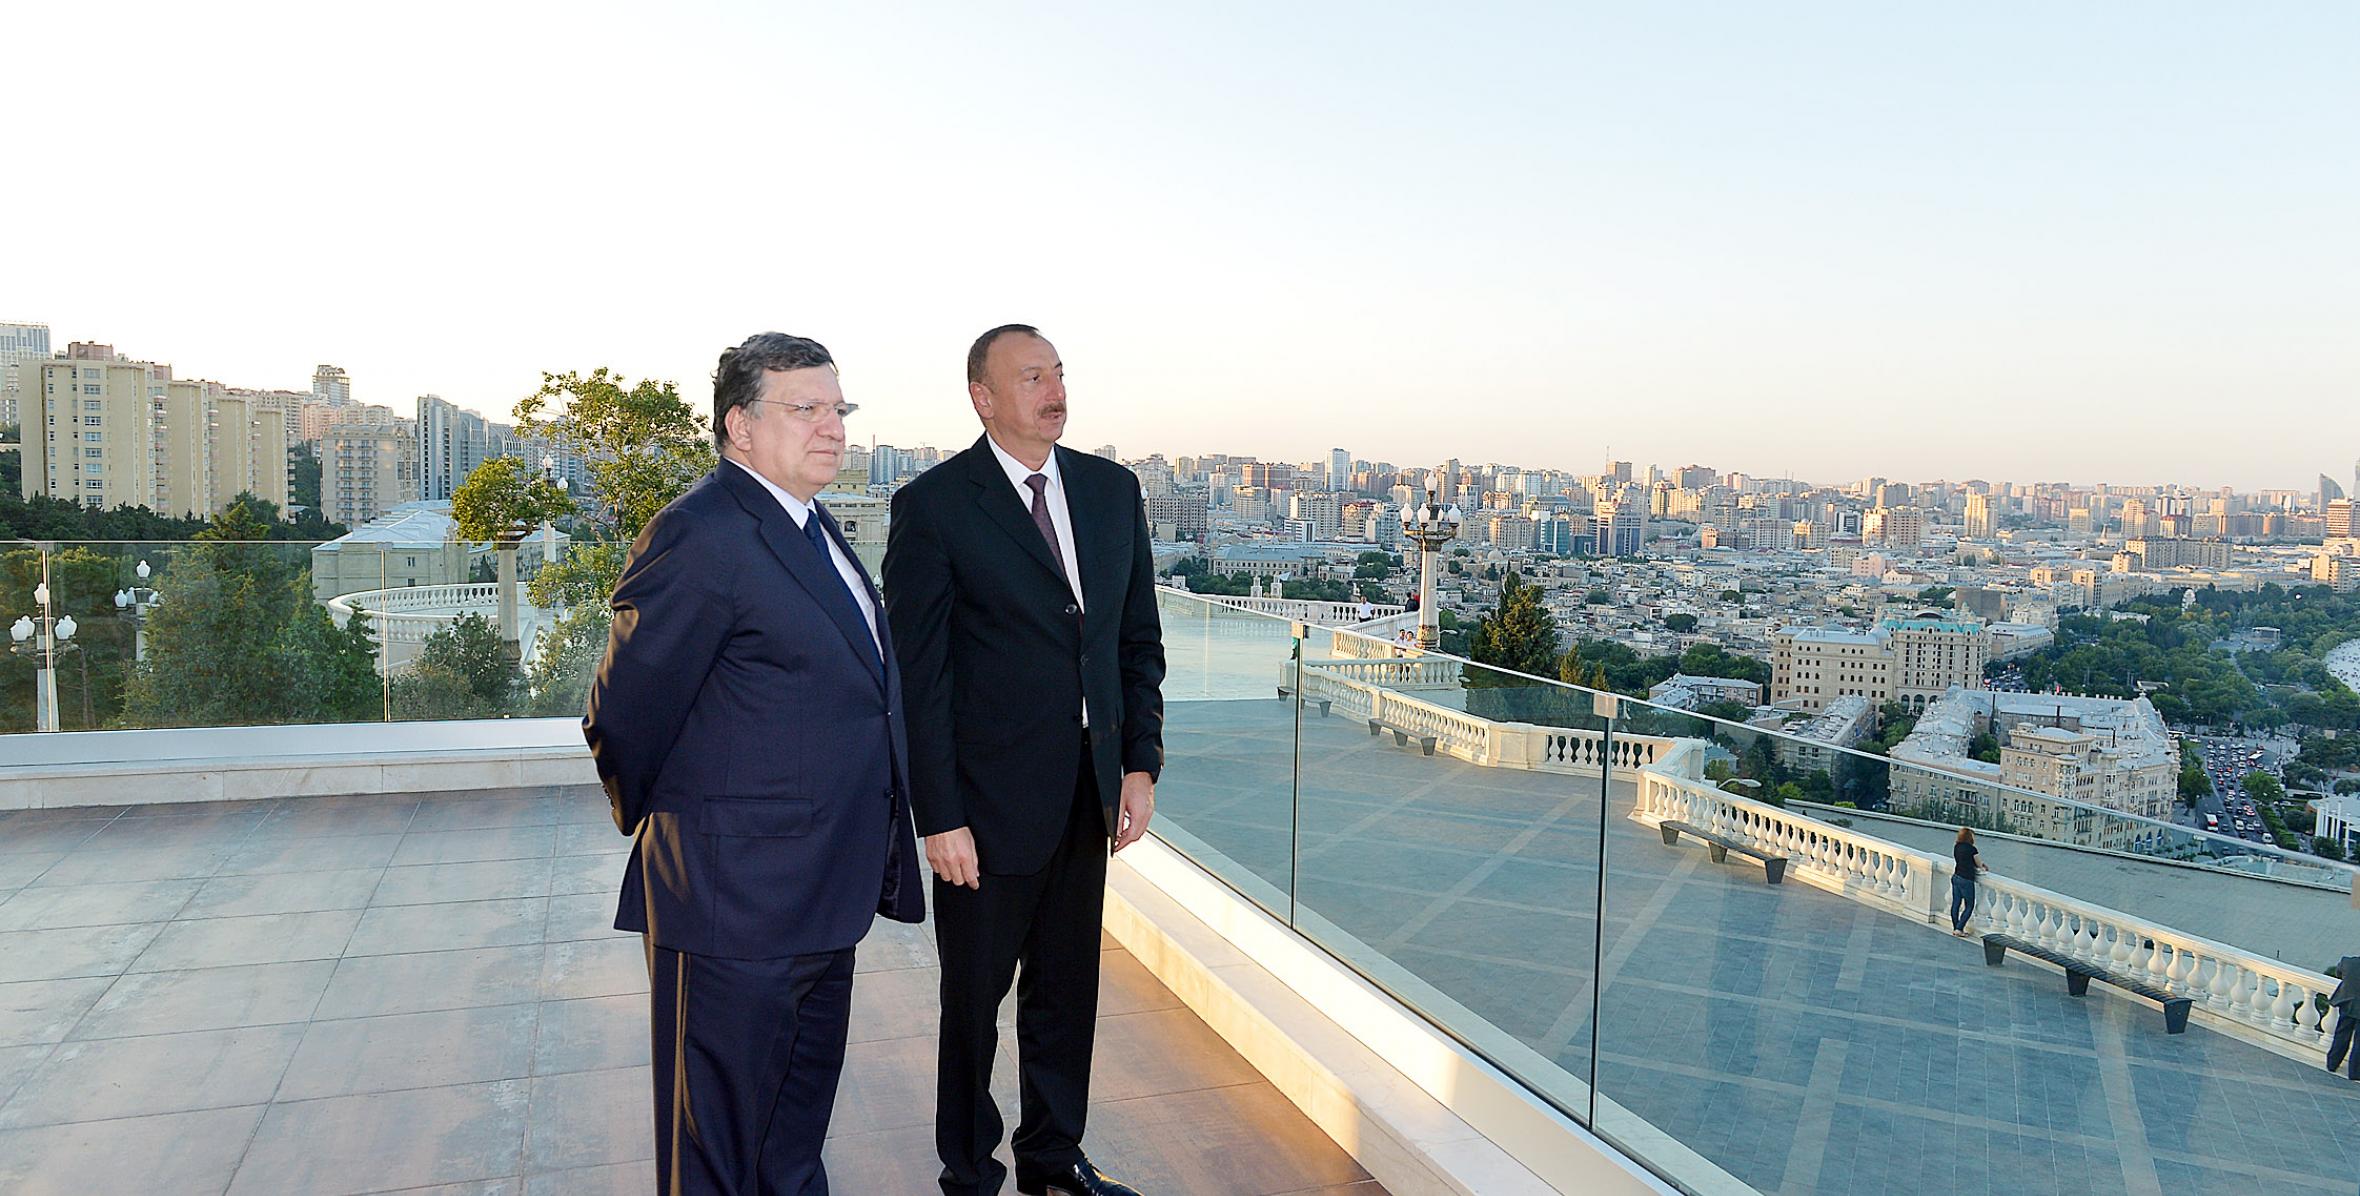 Ilham Aliyev and President of the European Commission Jose Manuel Barroso visited the Highland Park